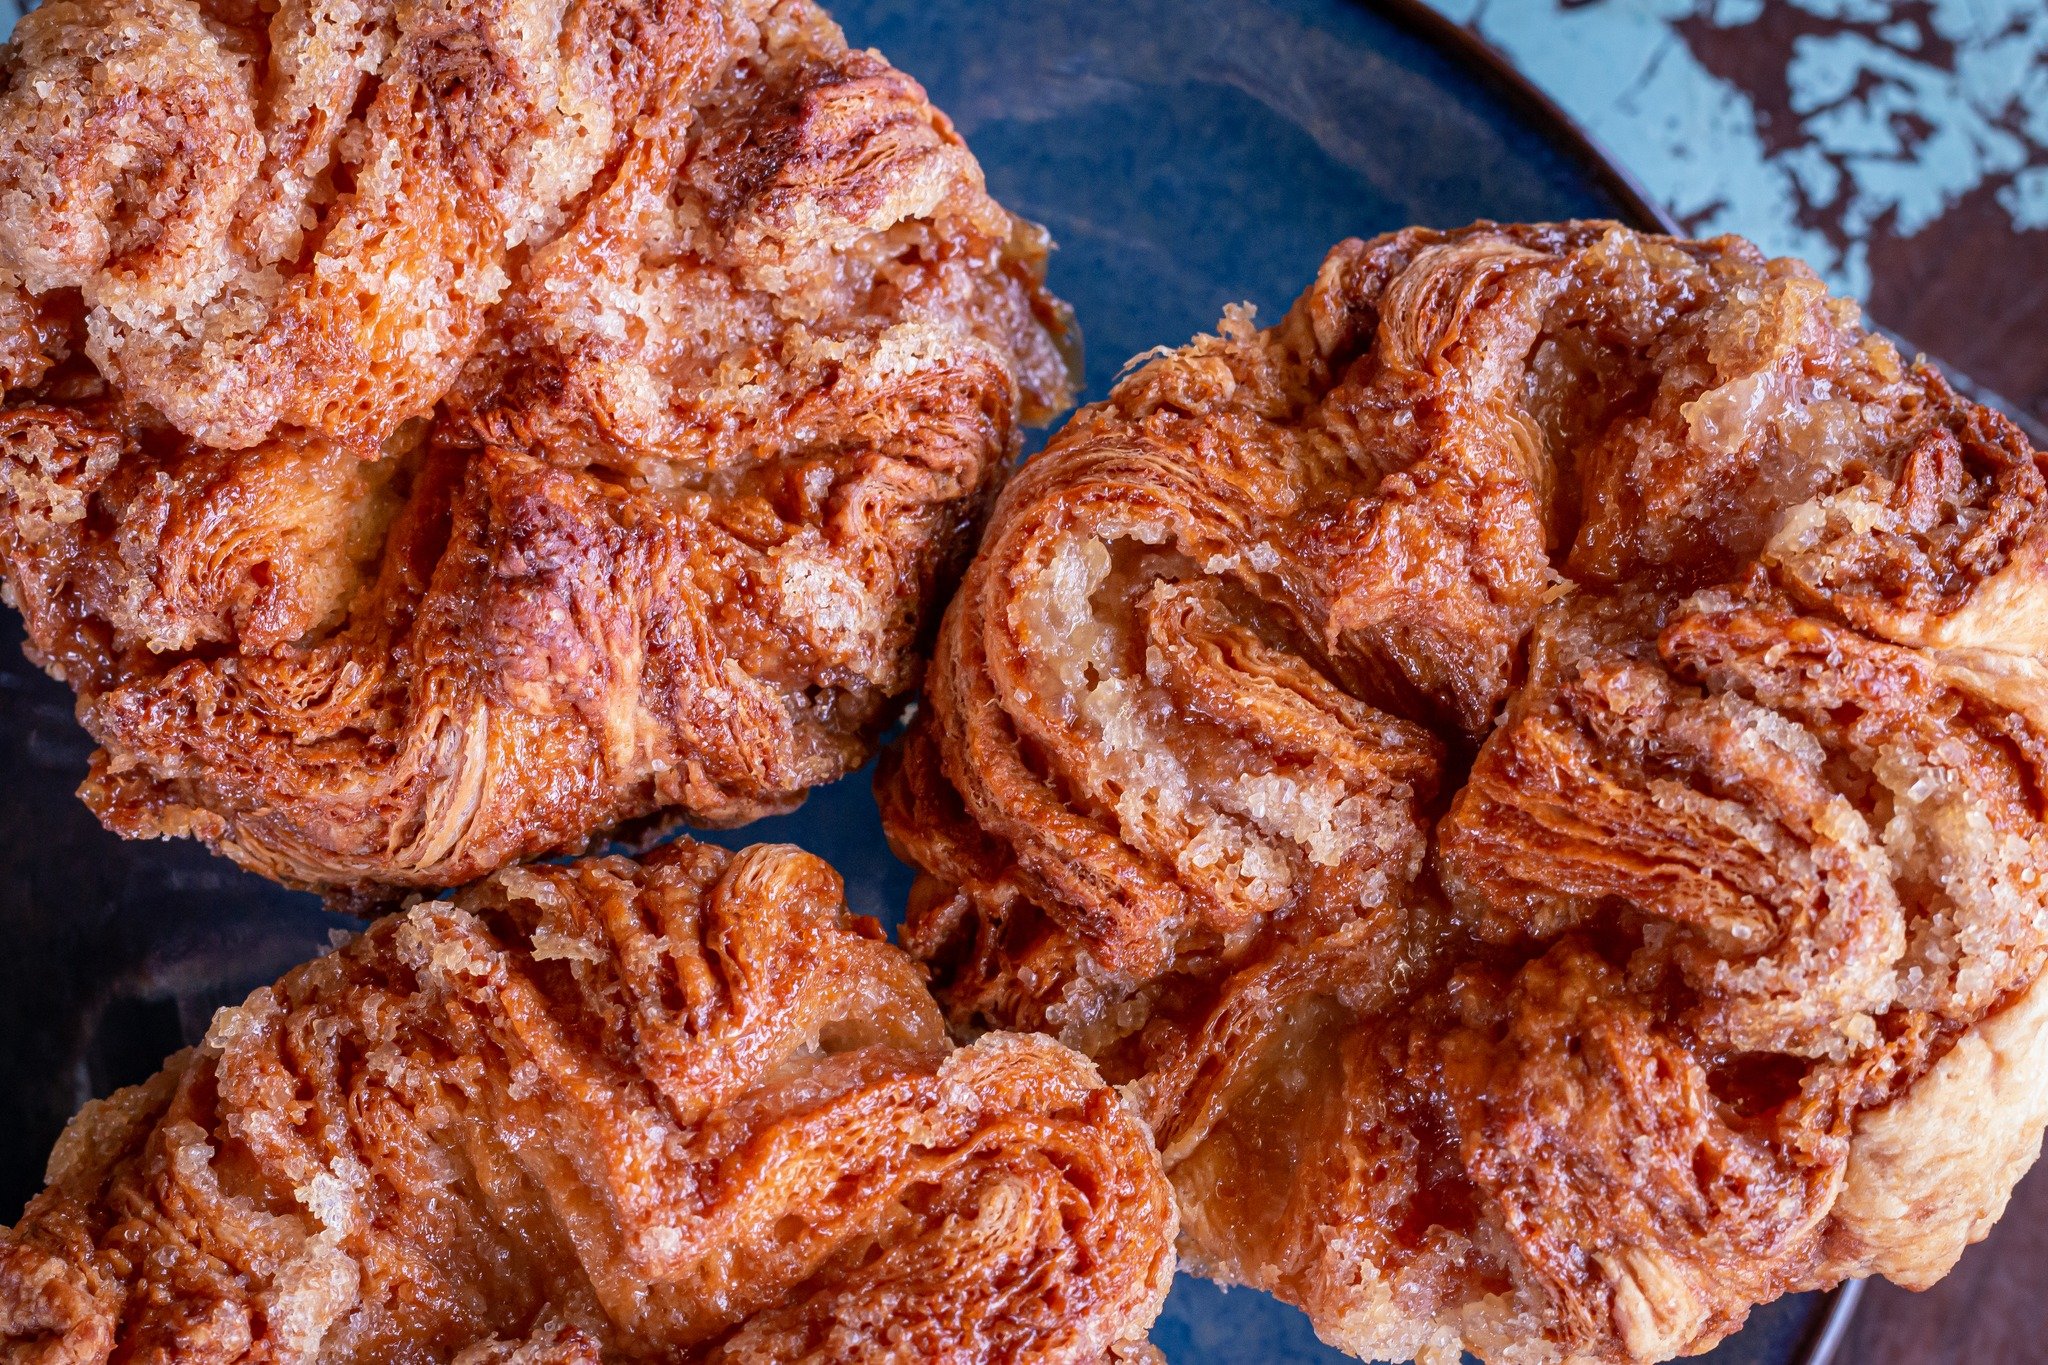 It's that time again! Our special pastry this weekend is the crowd favorite Kouign Amann. 

These buttery, flaky, caramelly confections will be available beginning tomorrow morning, APRIL 26TH, through Saturday, APRIL 27TH, while supplies last.

If y